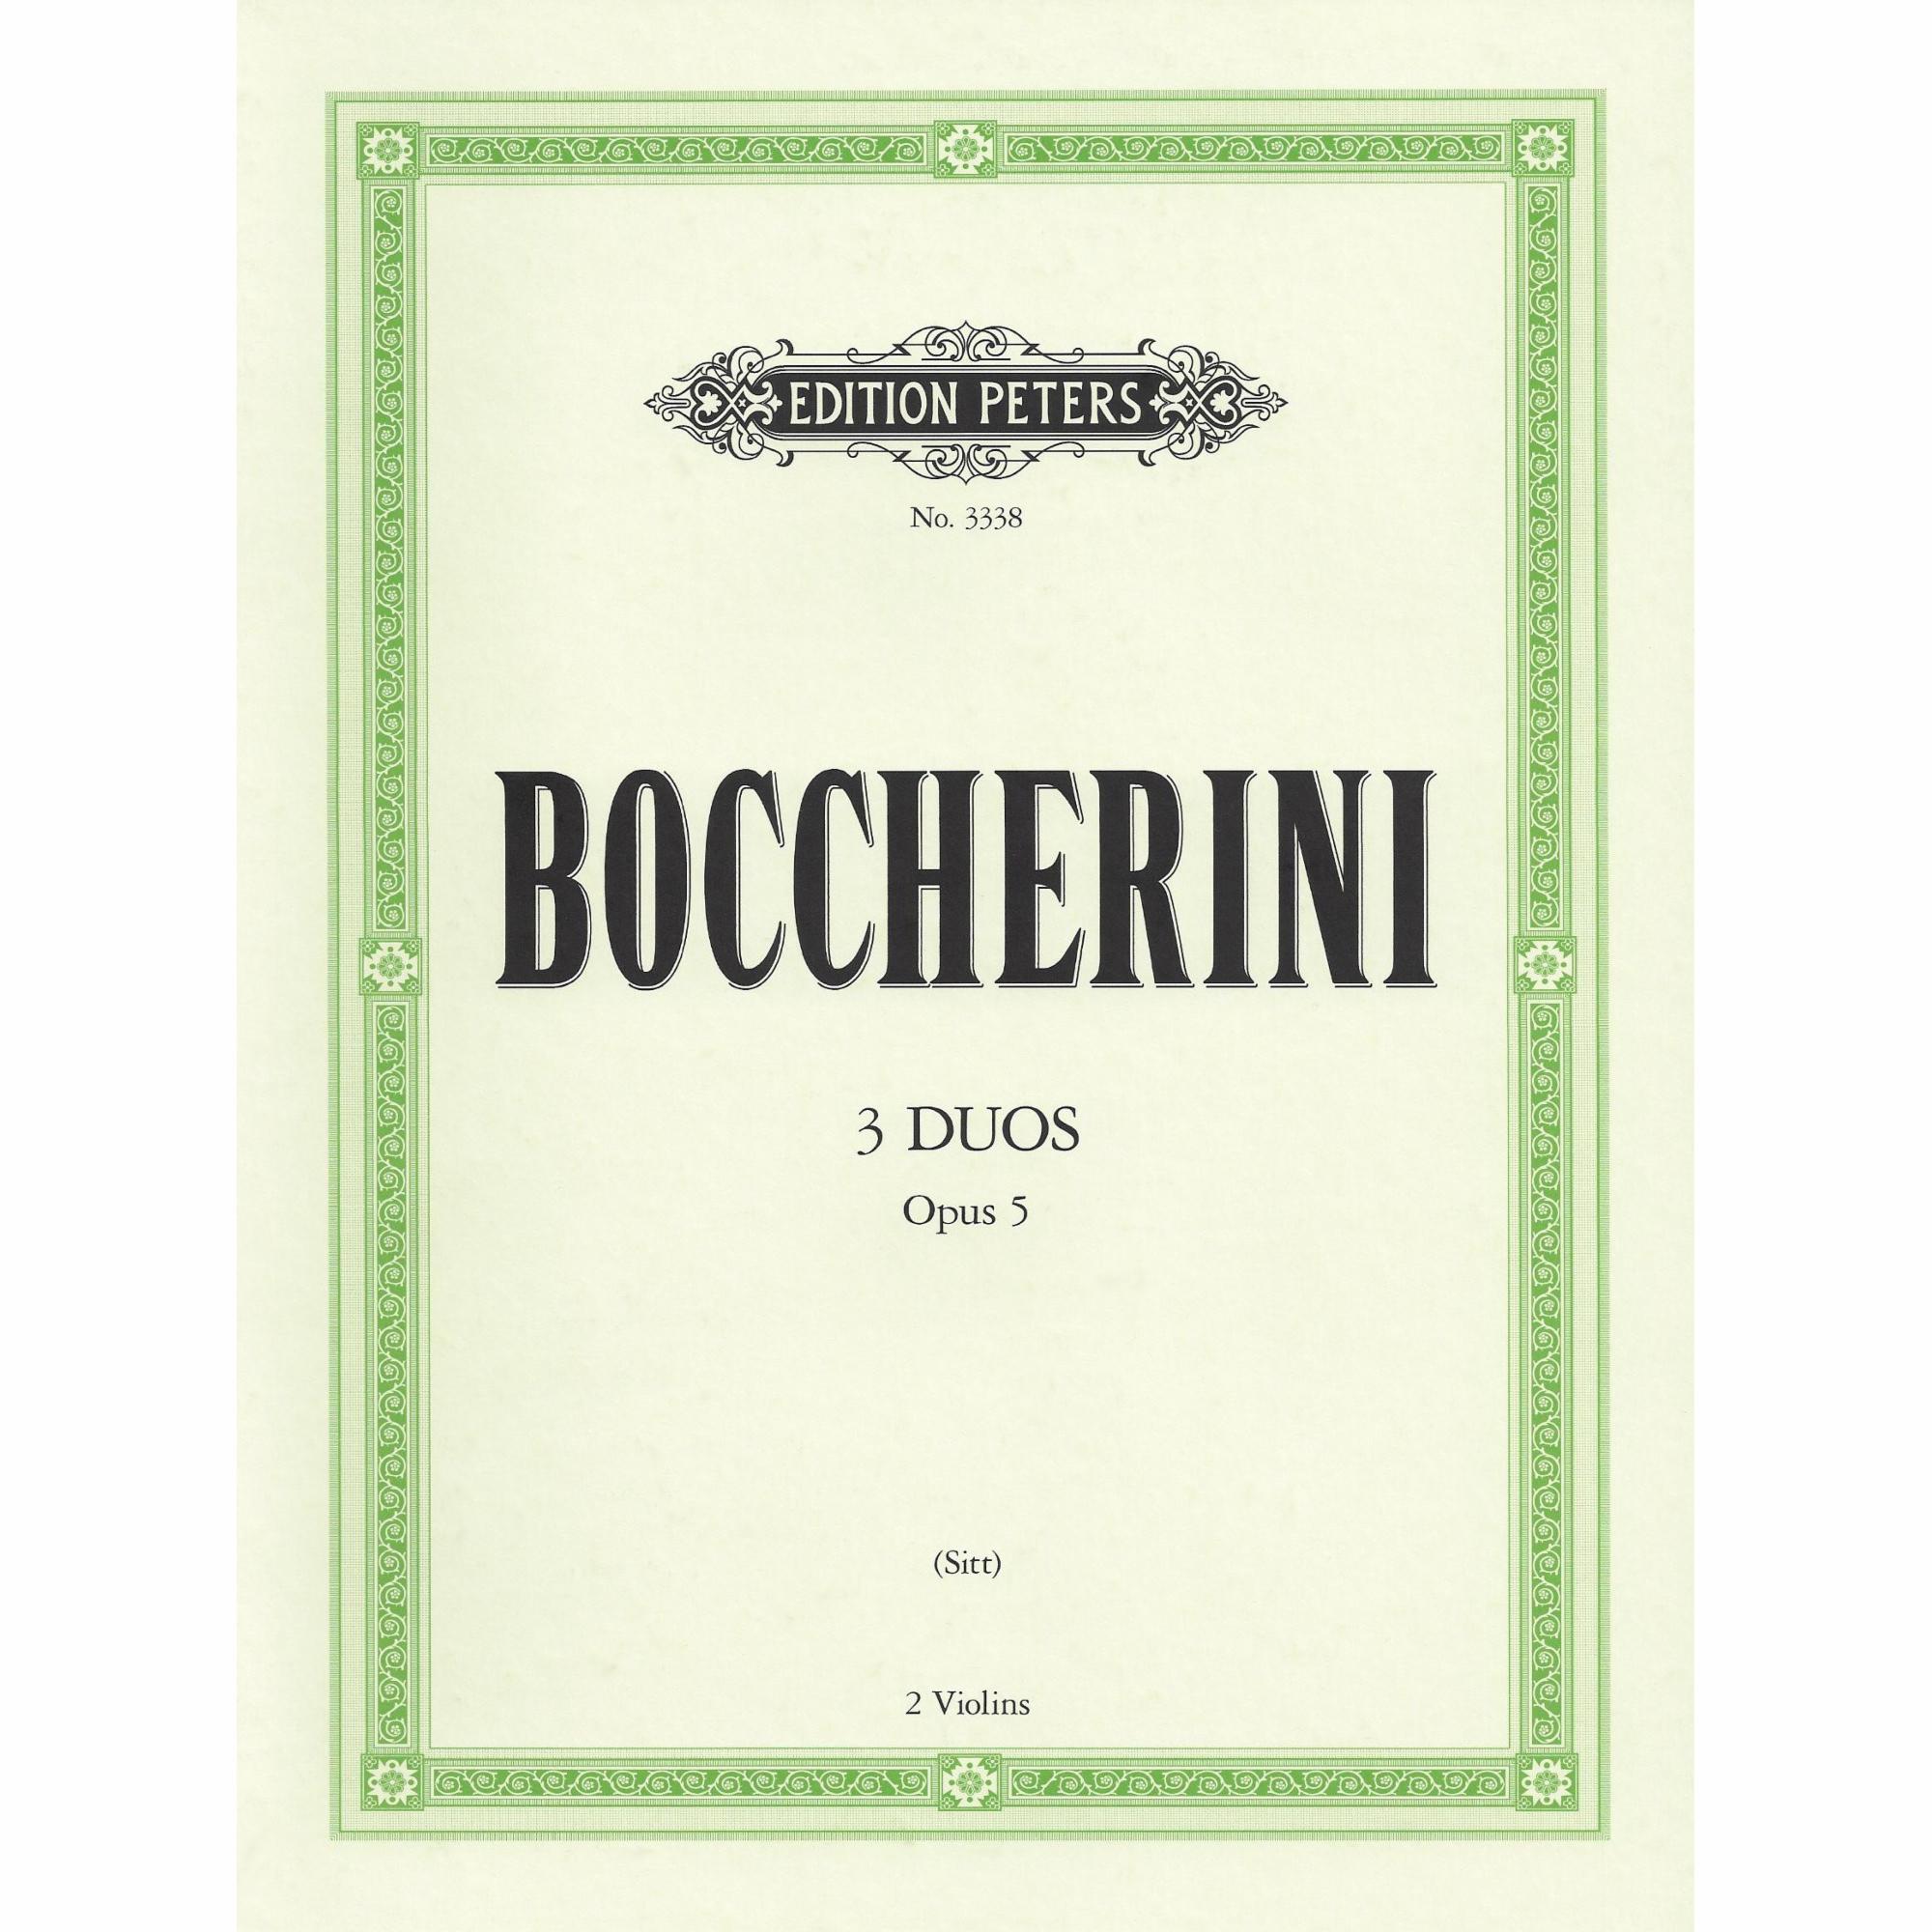 Boccherini -- 3 Duos, Op. 5 for Two Violins